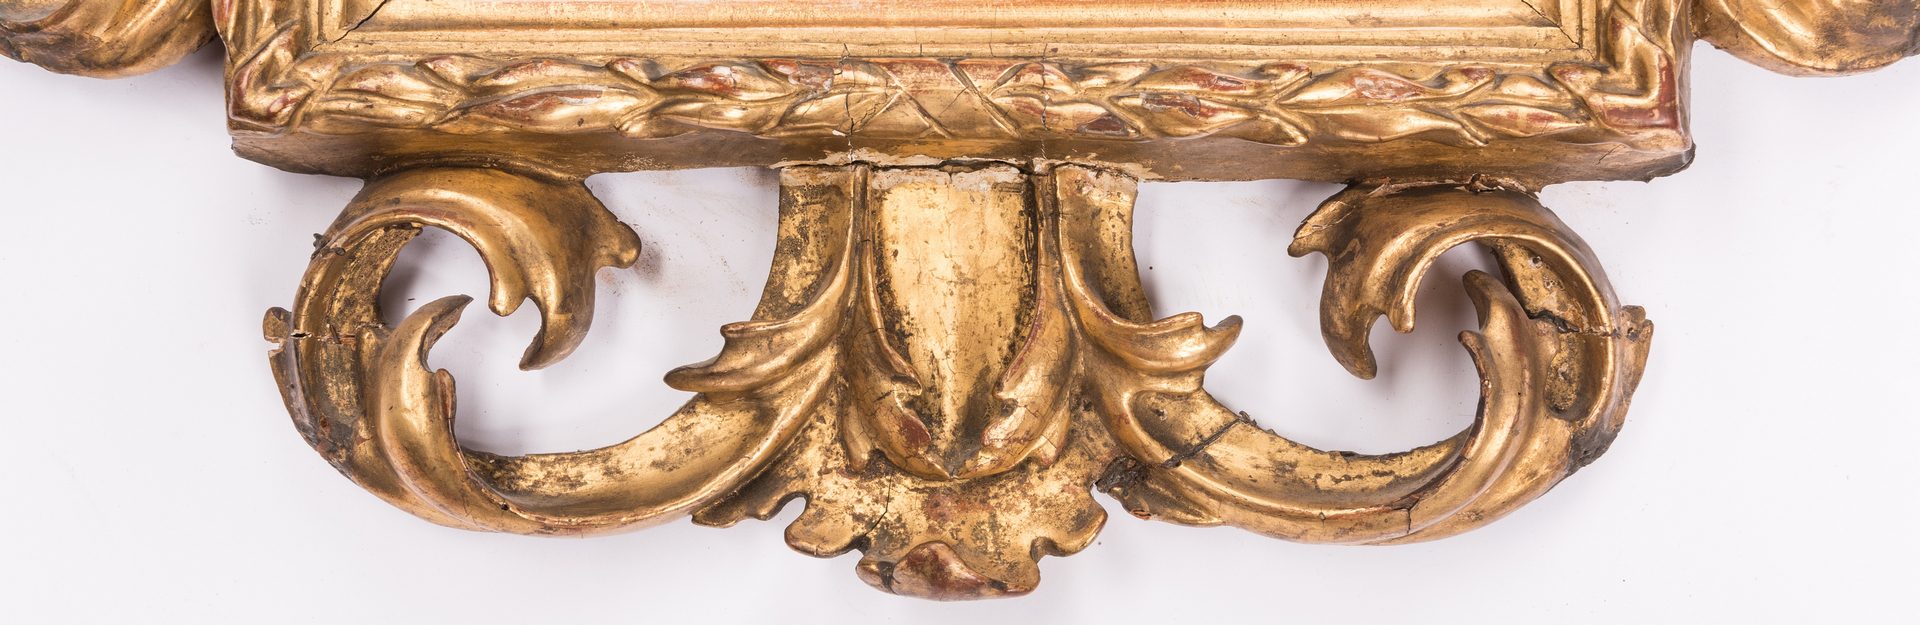 Lot 162: 19th Cent. Continental Gilt Carved Mirror